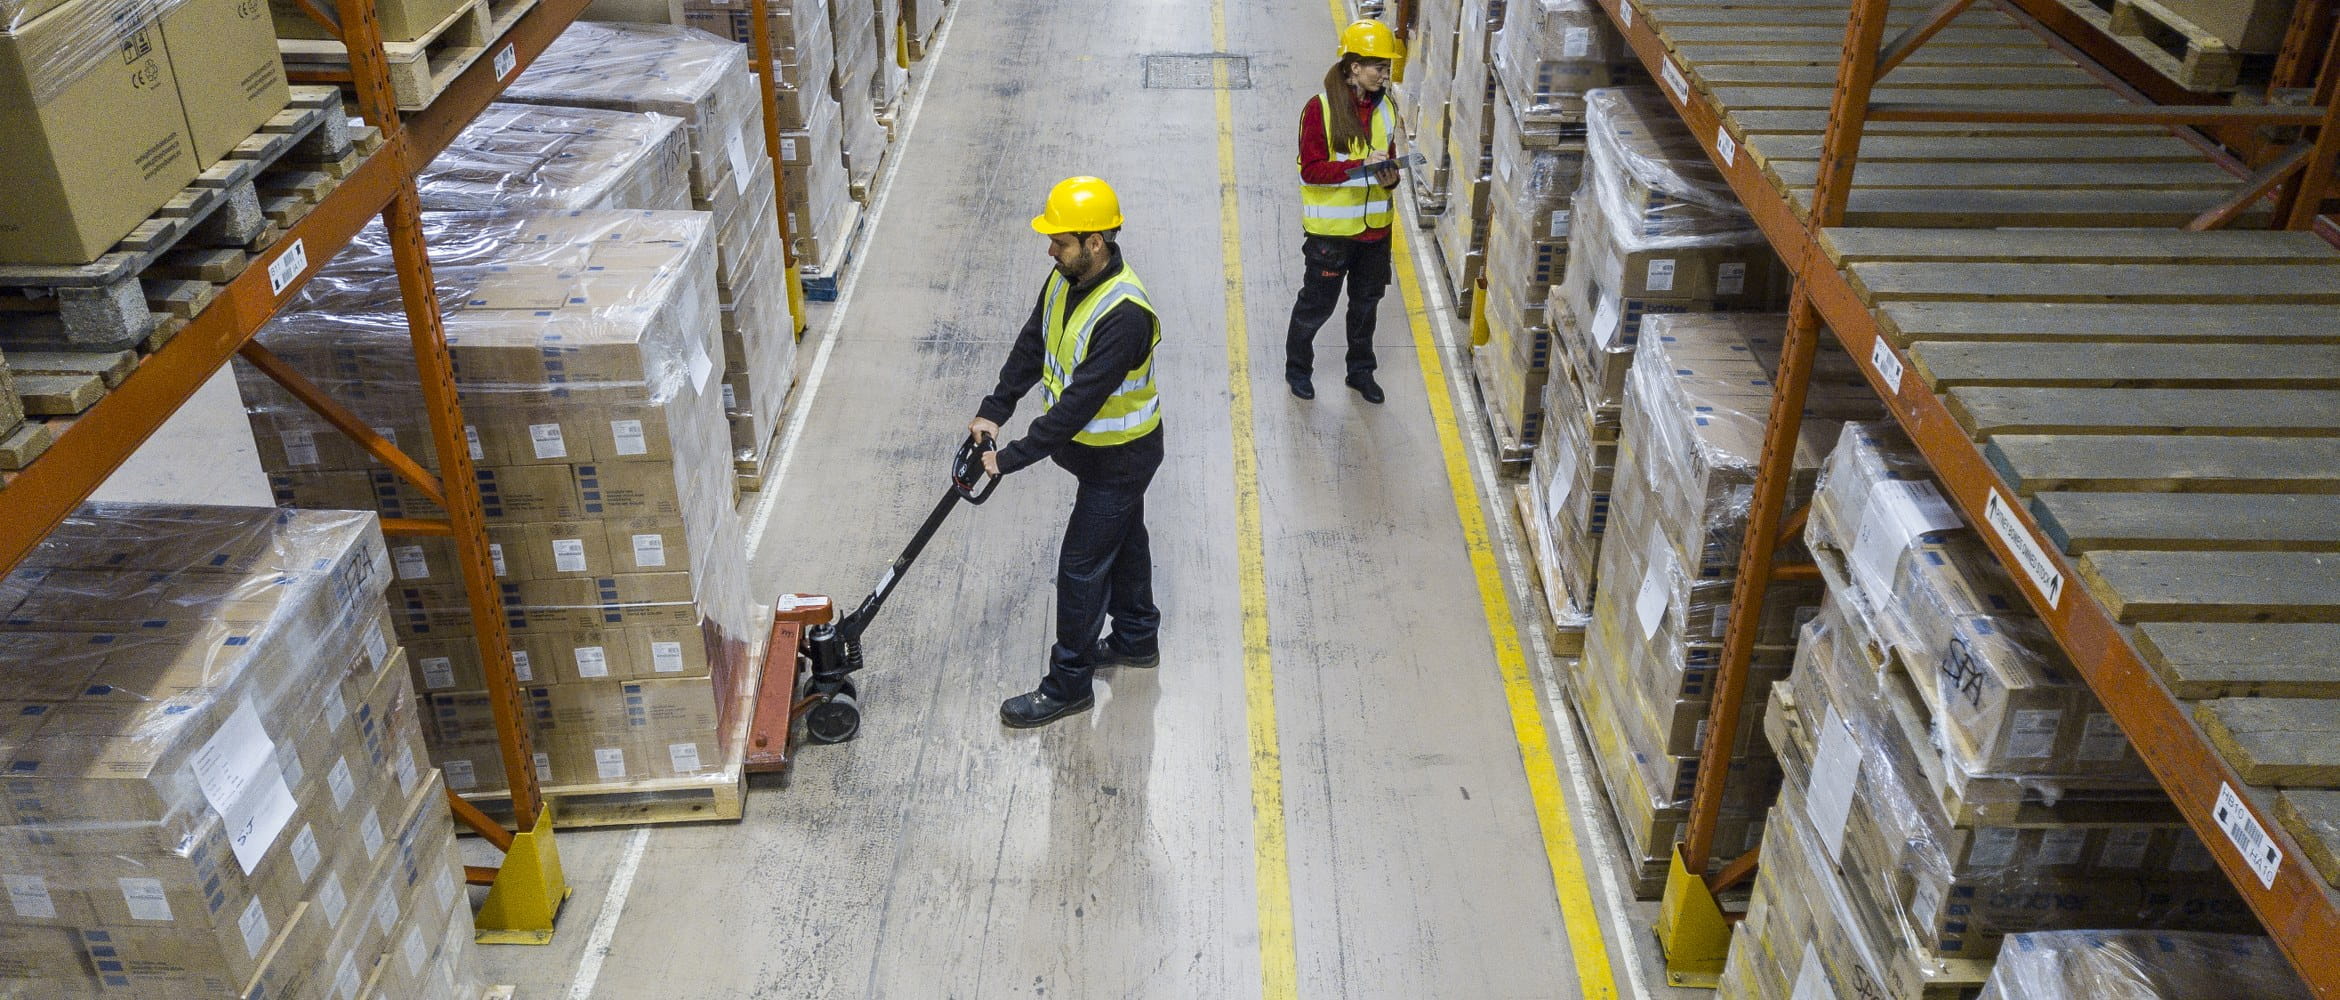 Two transportation and logistics workers are moving a pallet of retail goods in a warehouse for stock taking or delivery purposes